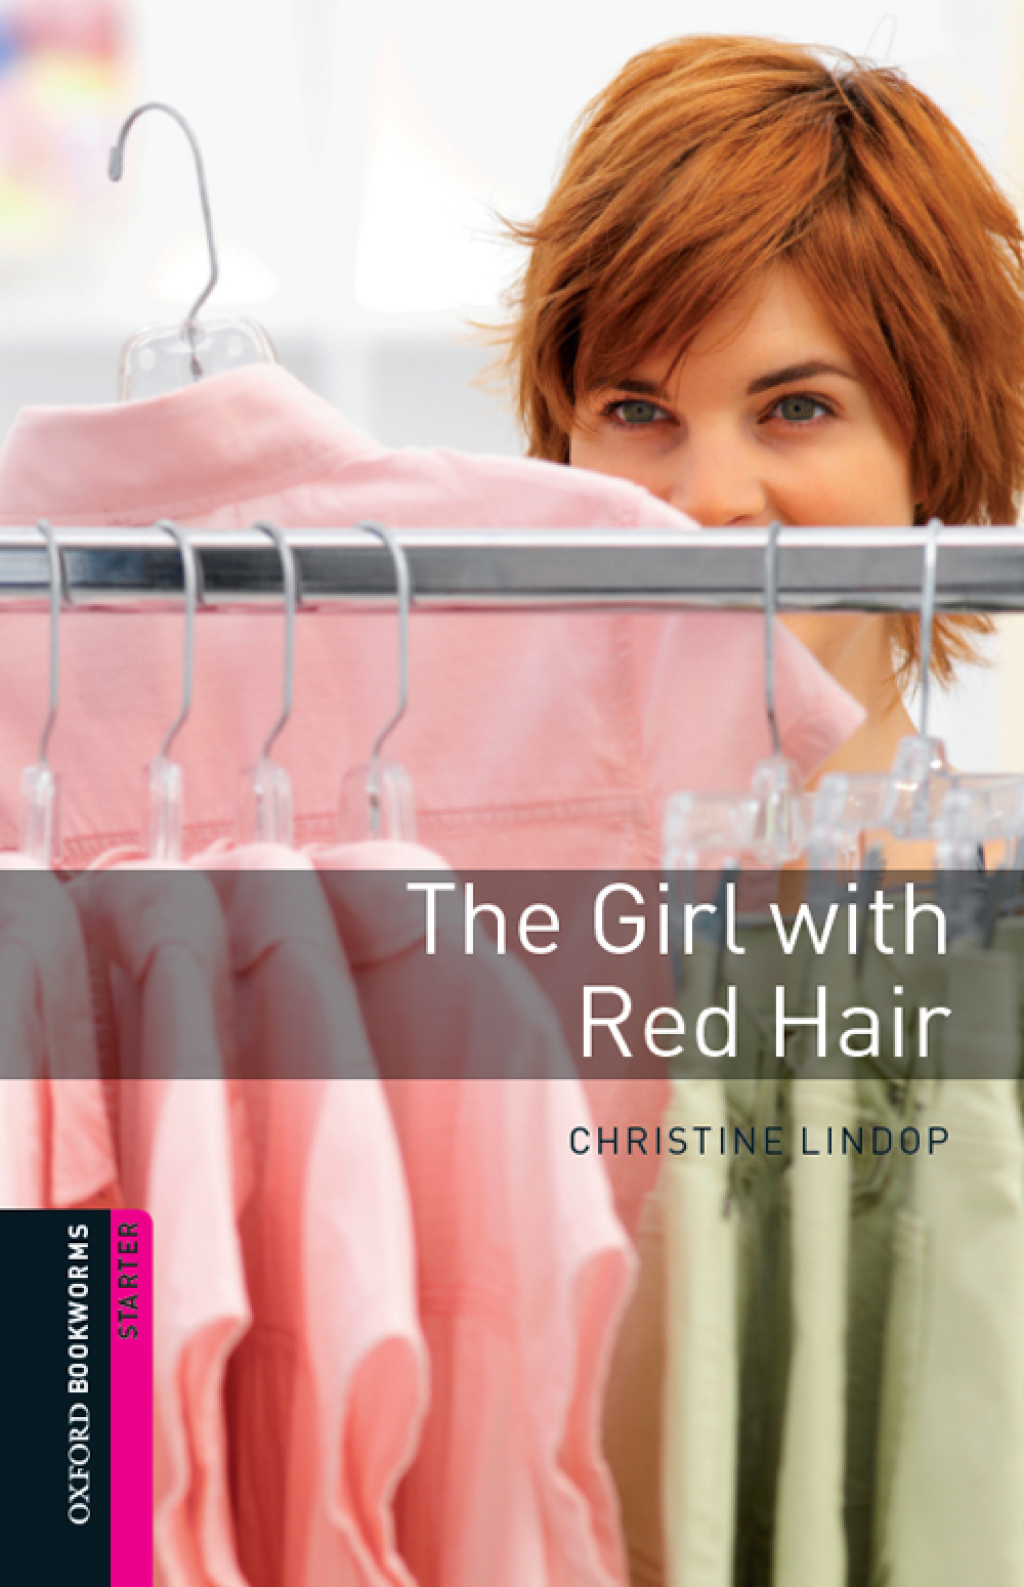 The Girl with Red Hair Starter Level Oxford Bookworms Library - 3rd Edition (eBook Rental)